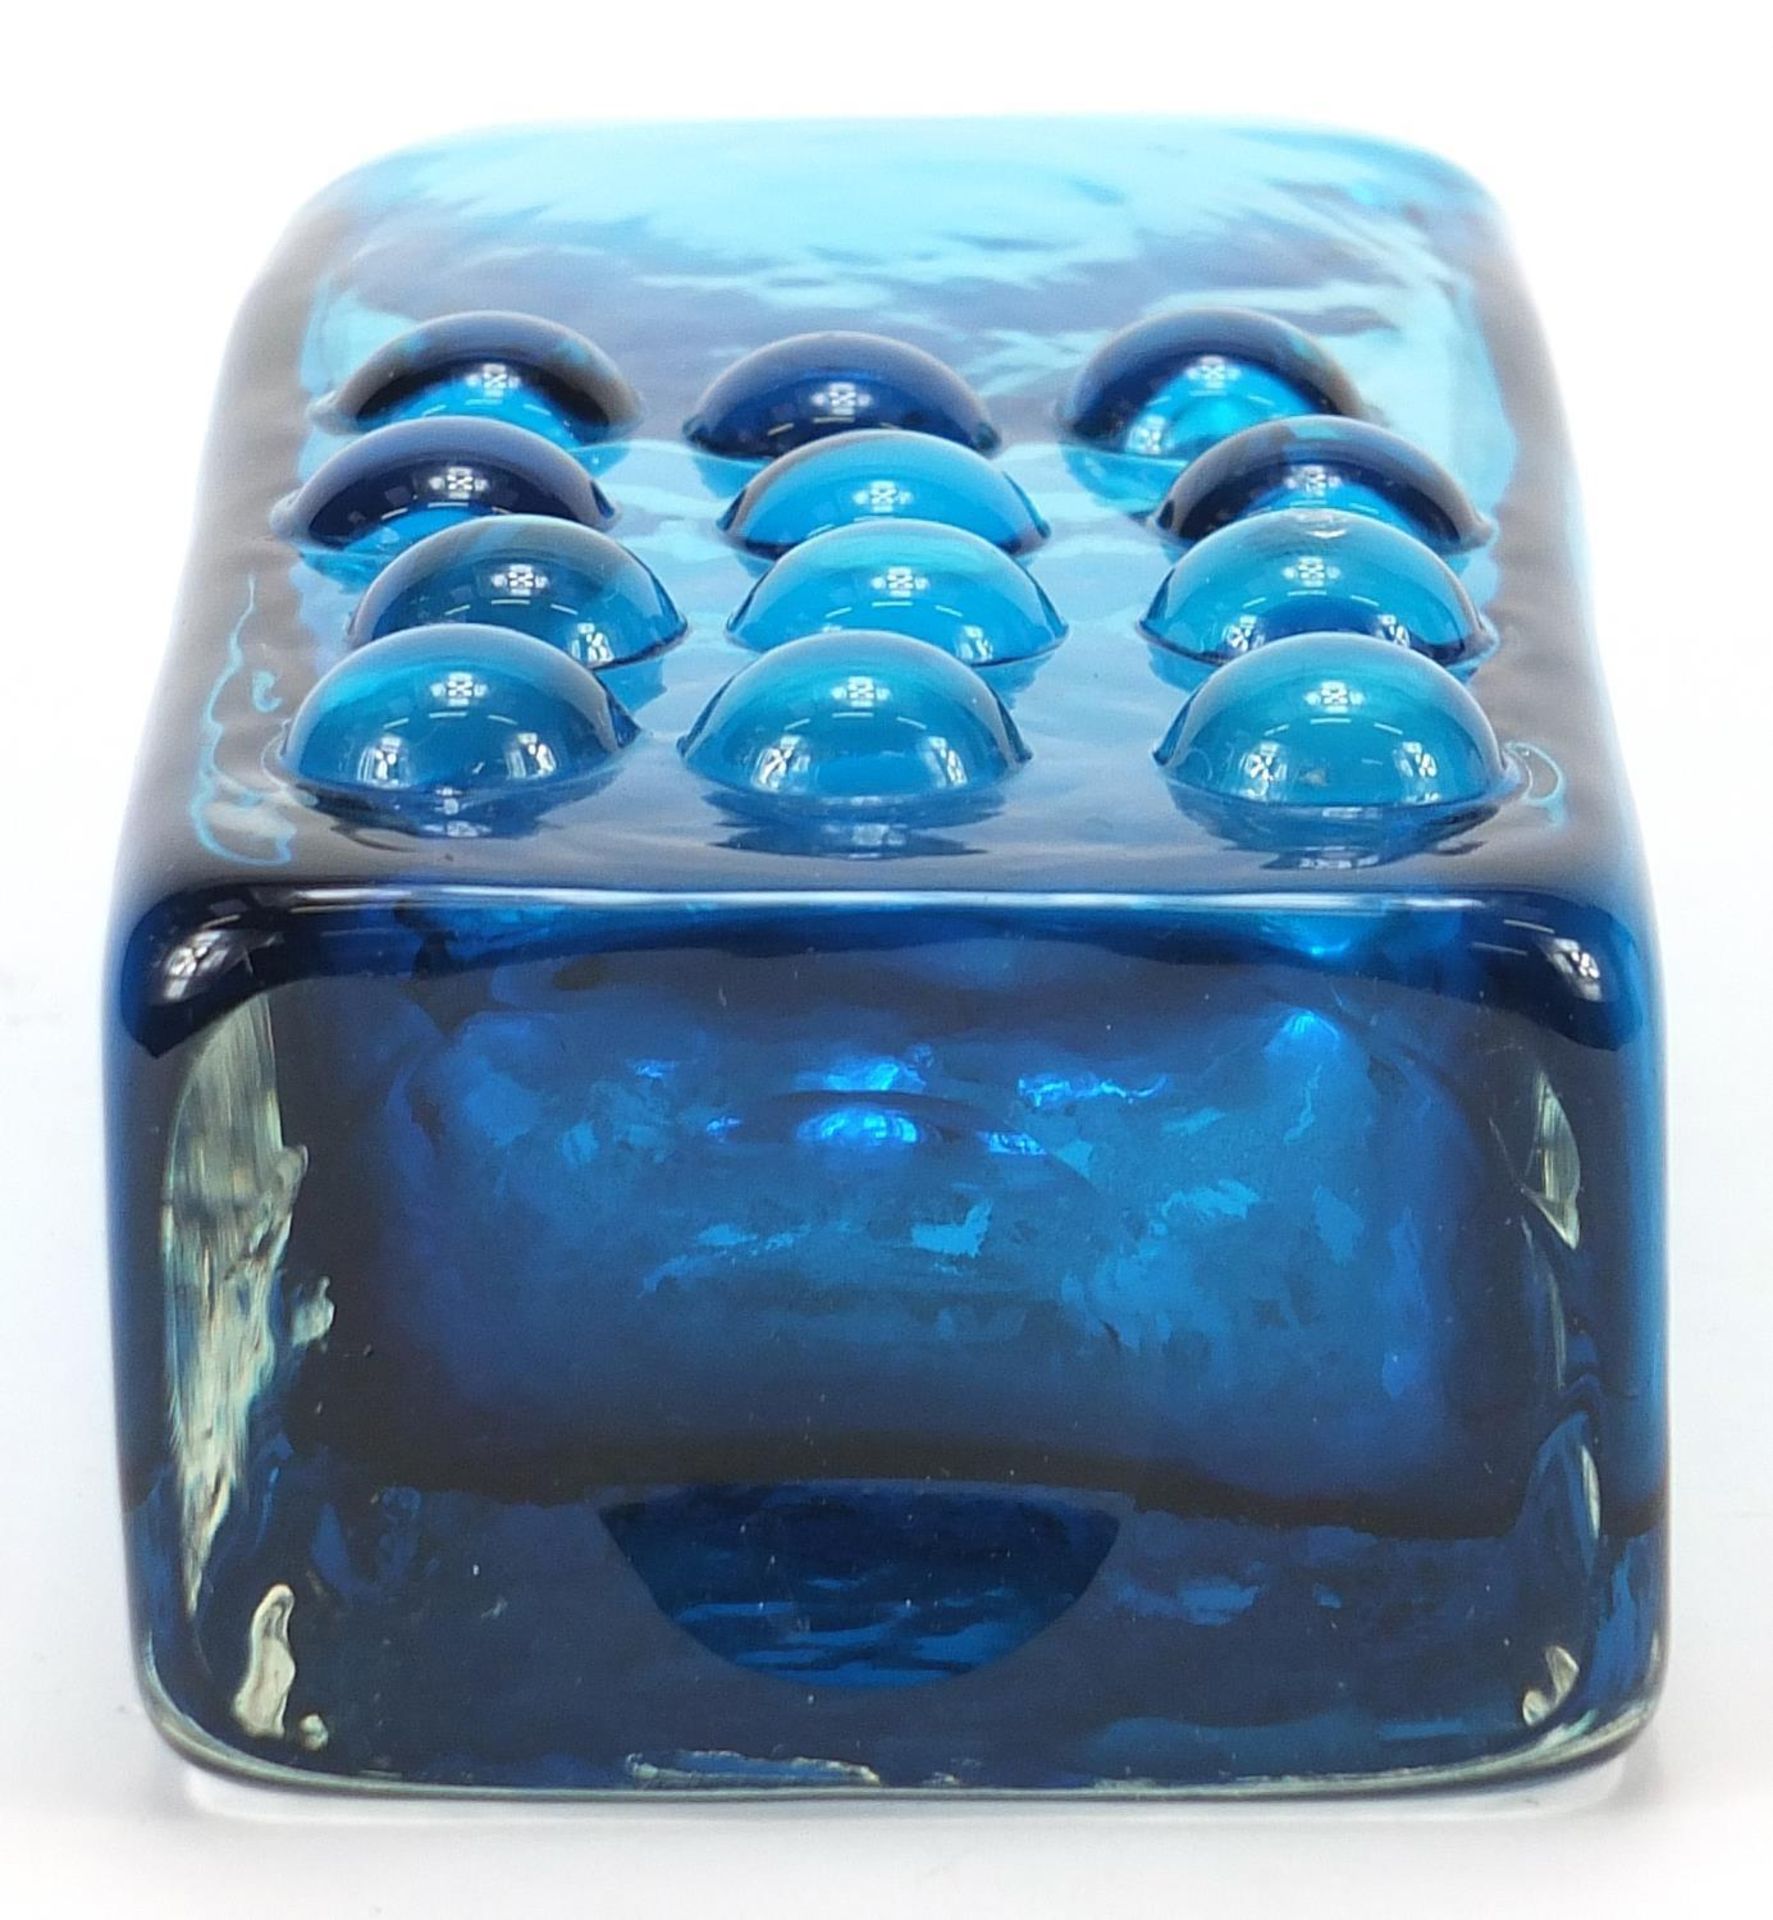 Geoffrey Baxter for Whitefriars, telephone glass vase in kingfisher blue, 17cm high - Image 4 of 4